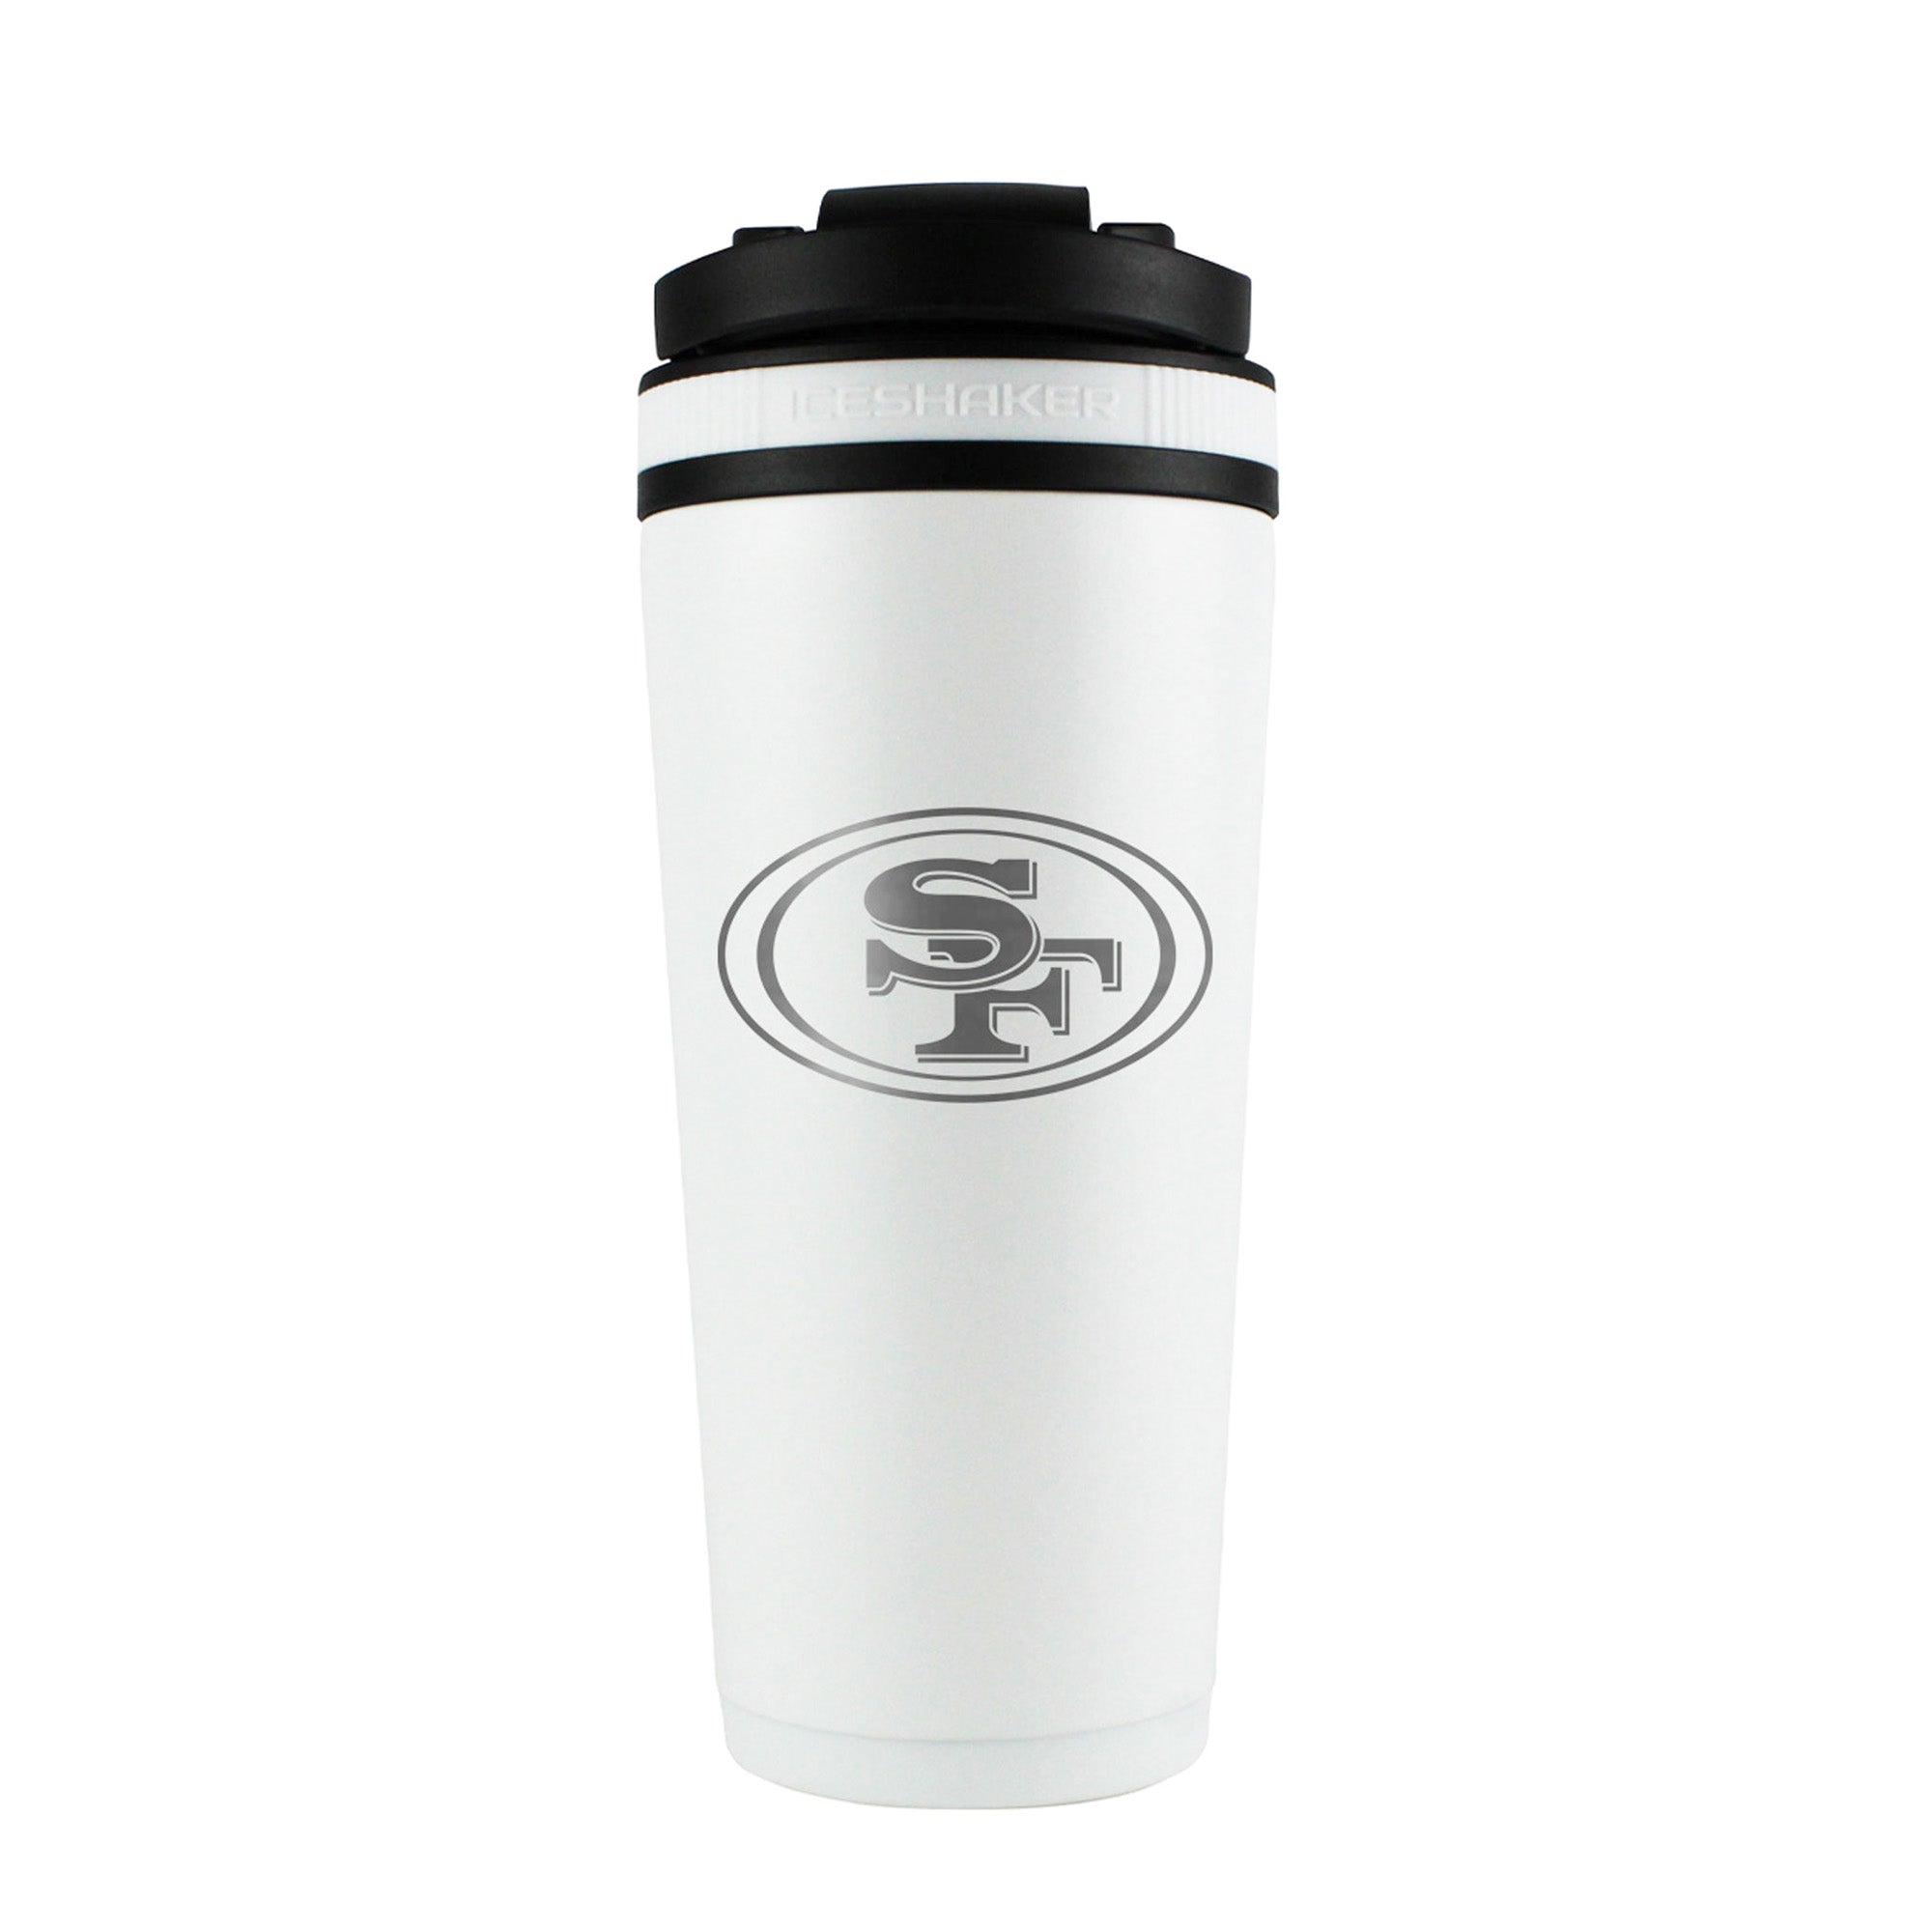 Buy 1776 Frosted White Sport Shaker Bottle - Freedom Fatigues